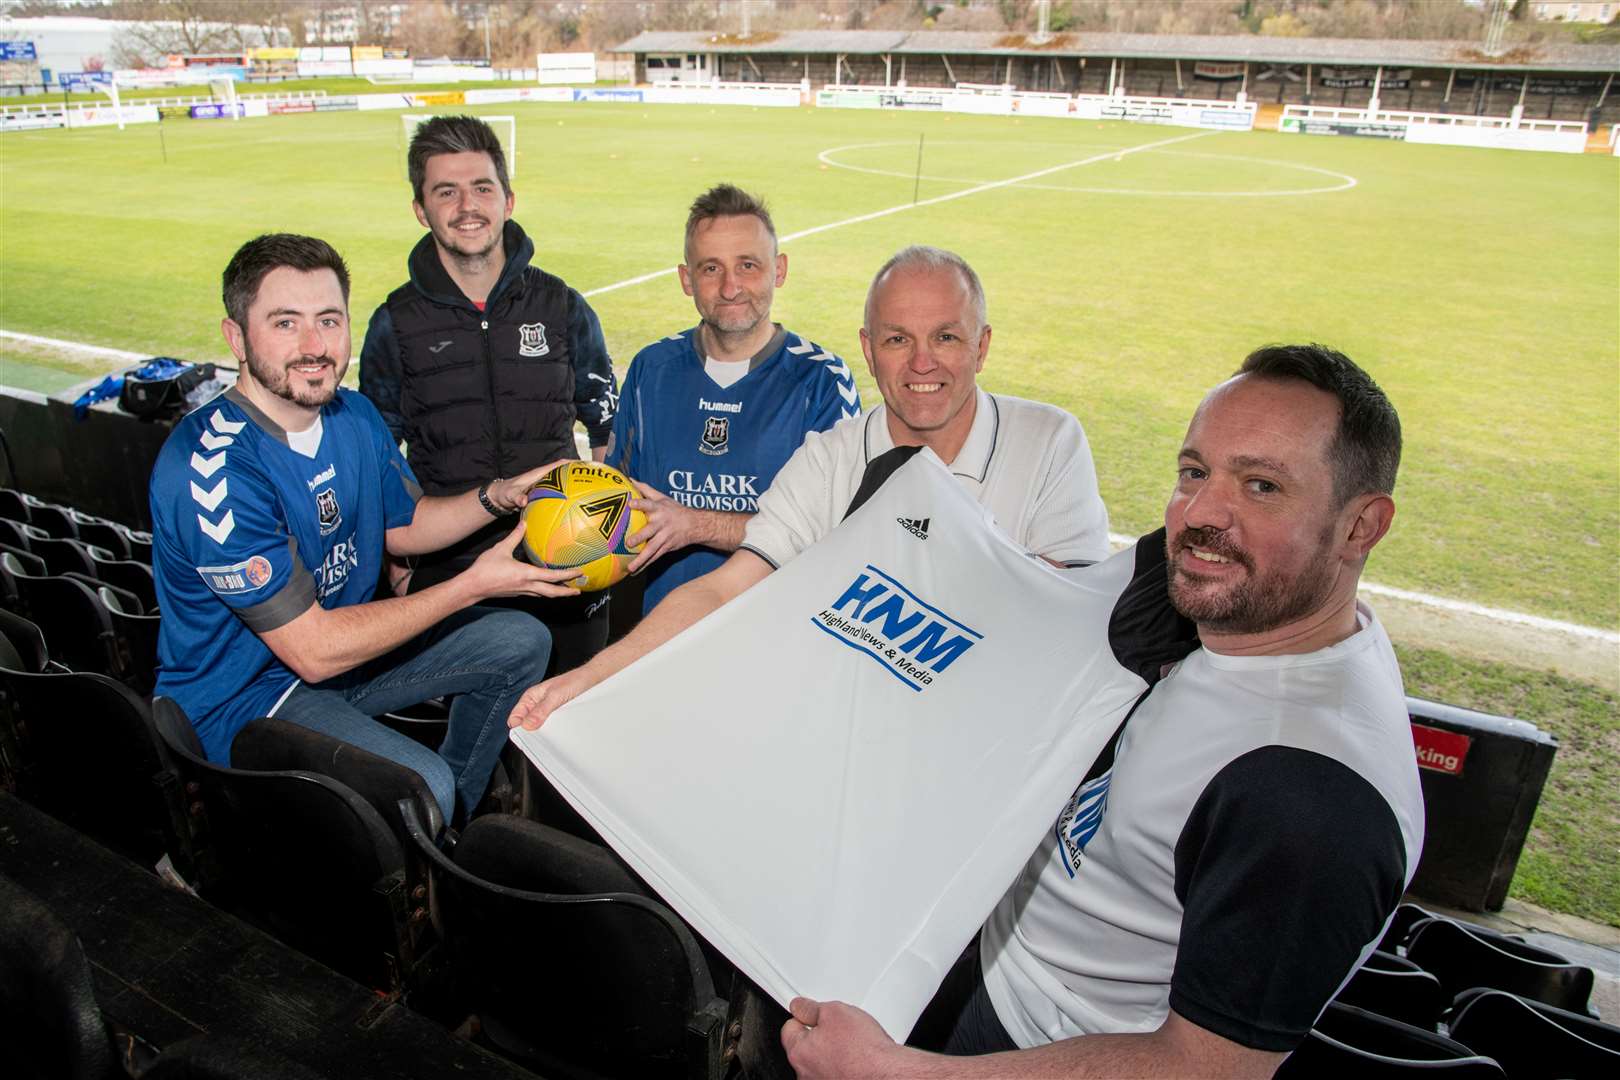 Let the game begin! Harry Bruce (left), from Moray Police, with team-mate Steve Borzoni, Keiran Carty of Elgin City (2nd from left) and Chris Saunderson and Joe Millican (right) of Highland News and Media. Picture: Daniel Forsyth